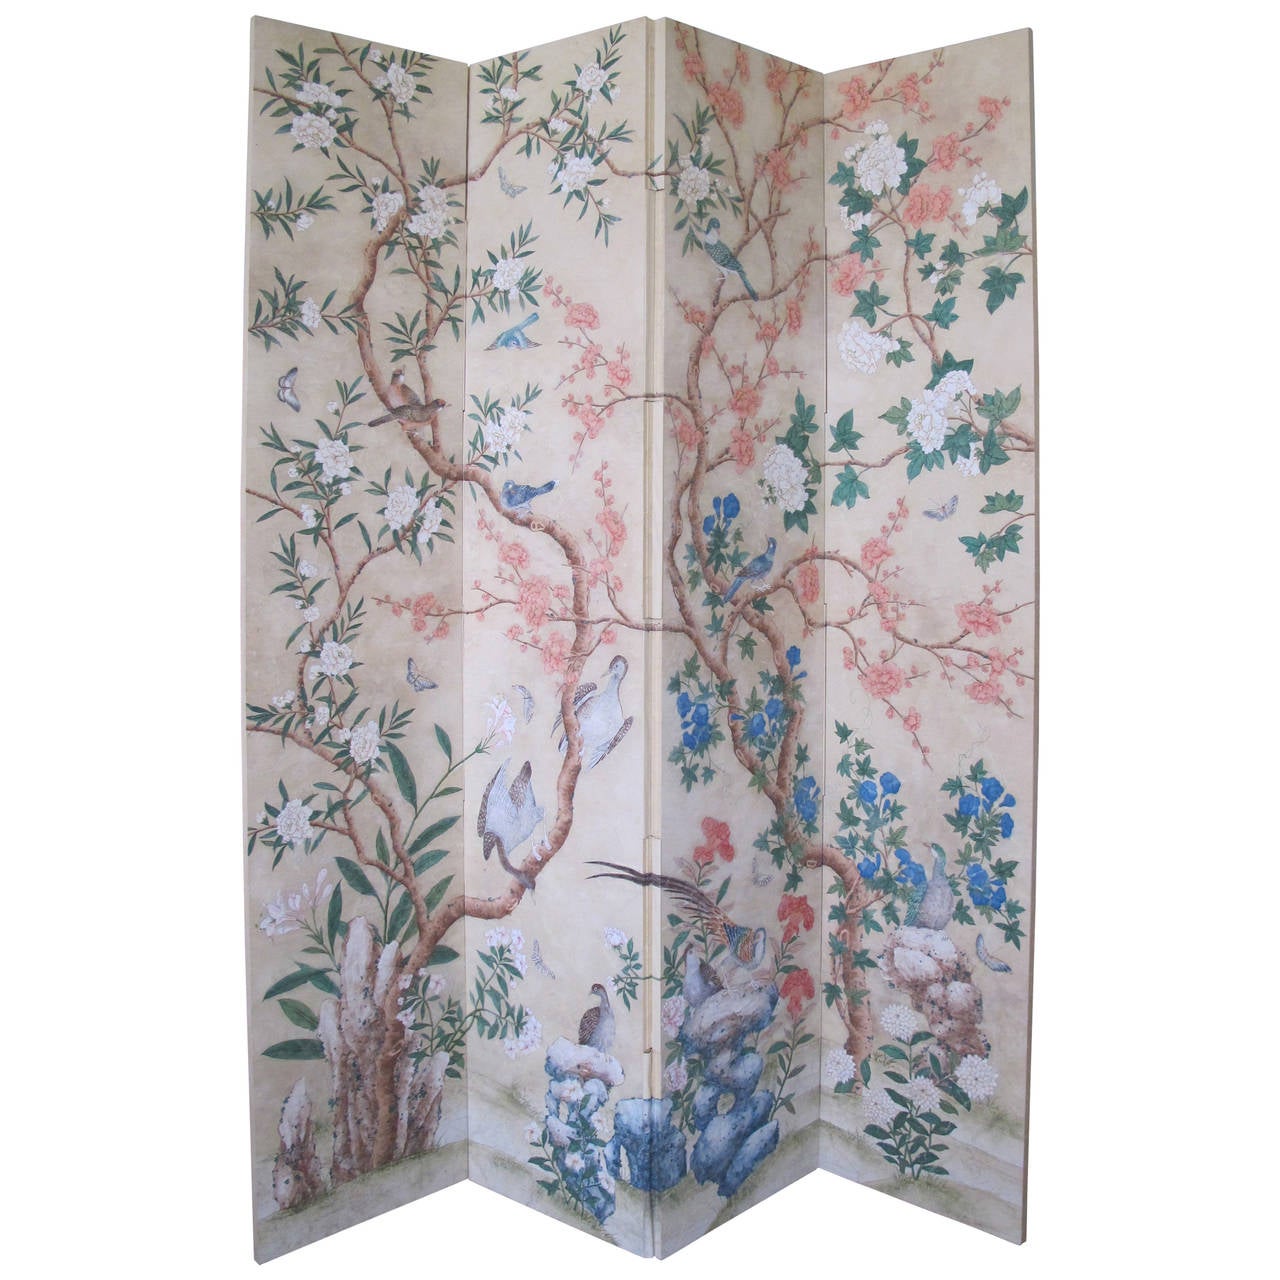 Hand-Painted Four-Panel Gracie Wallpaper Screen